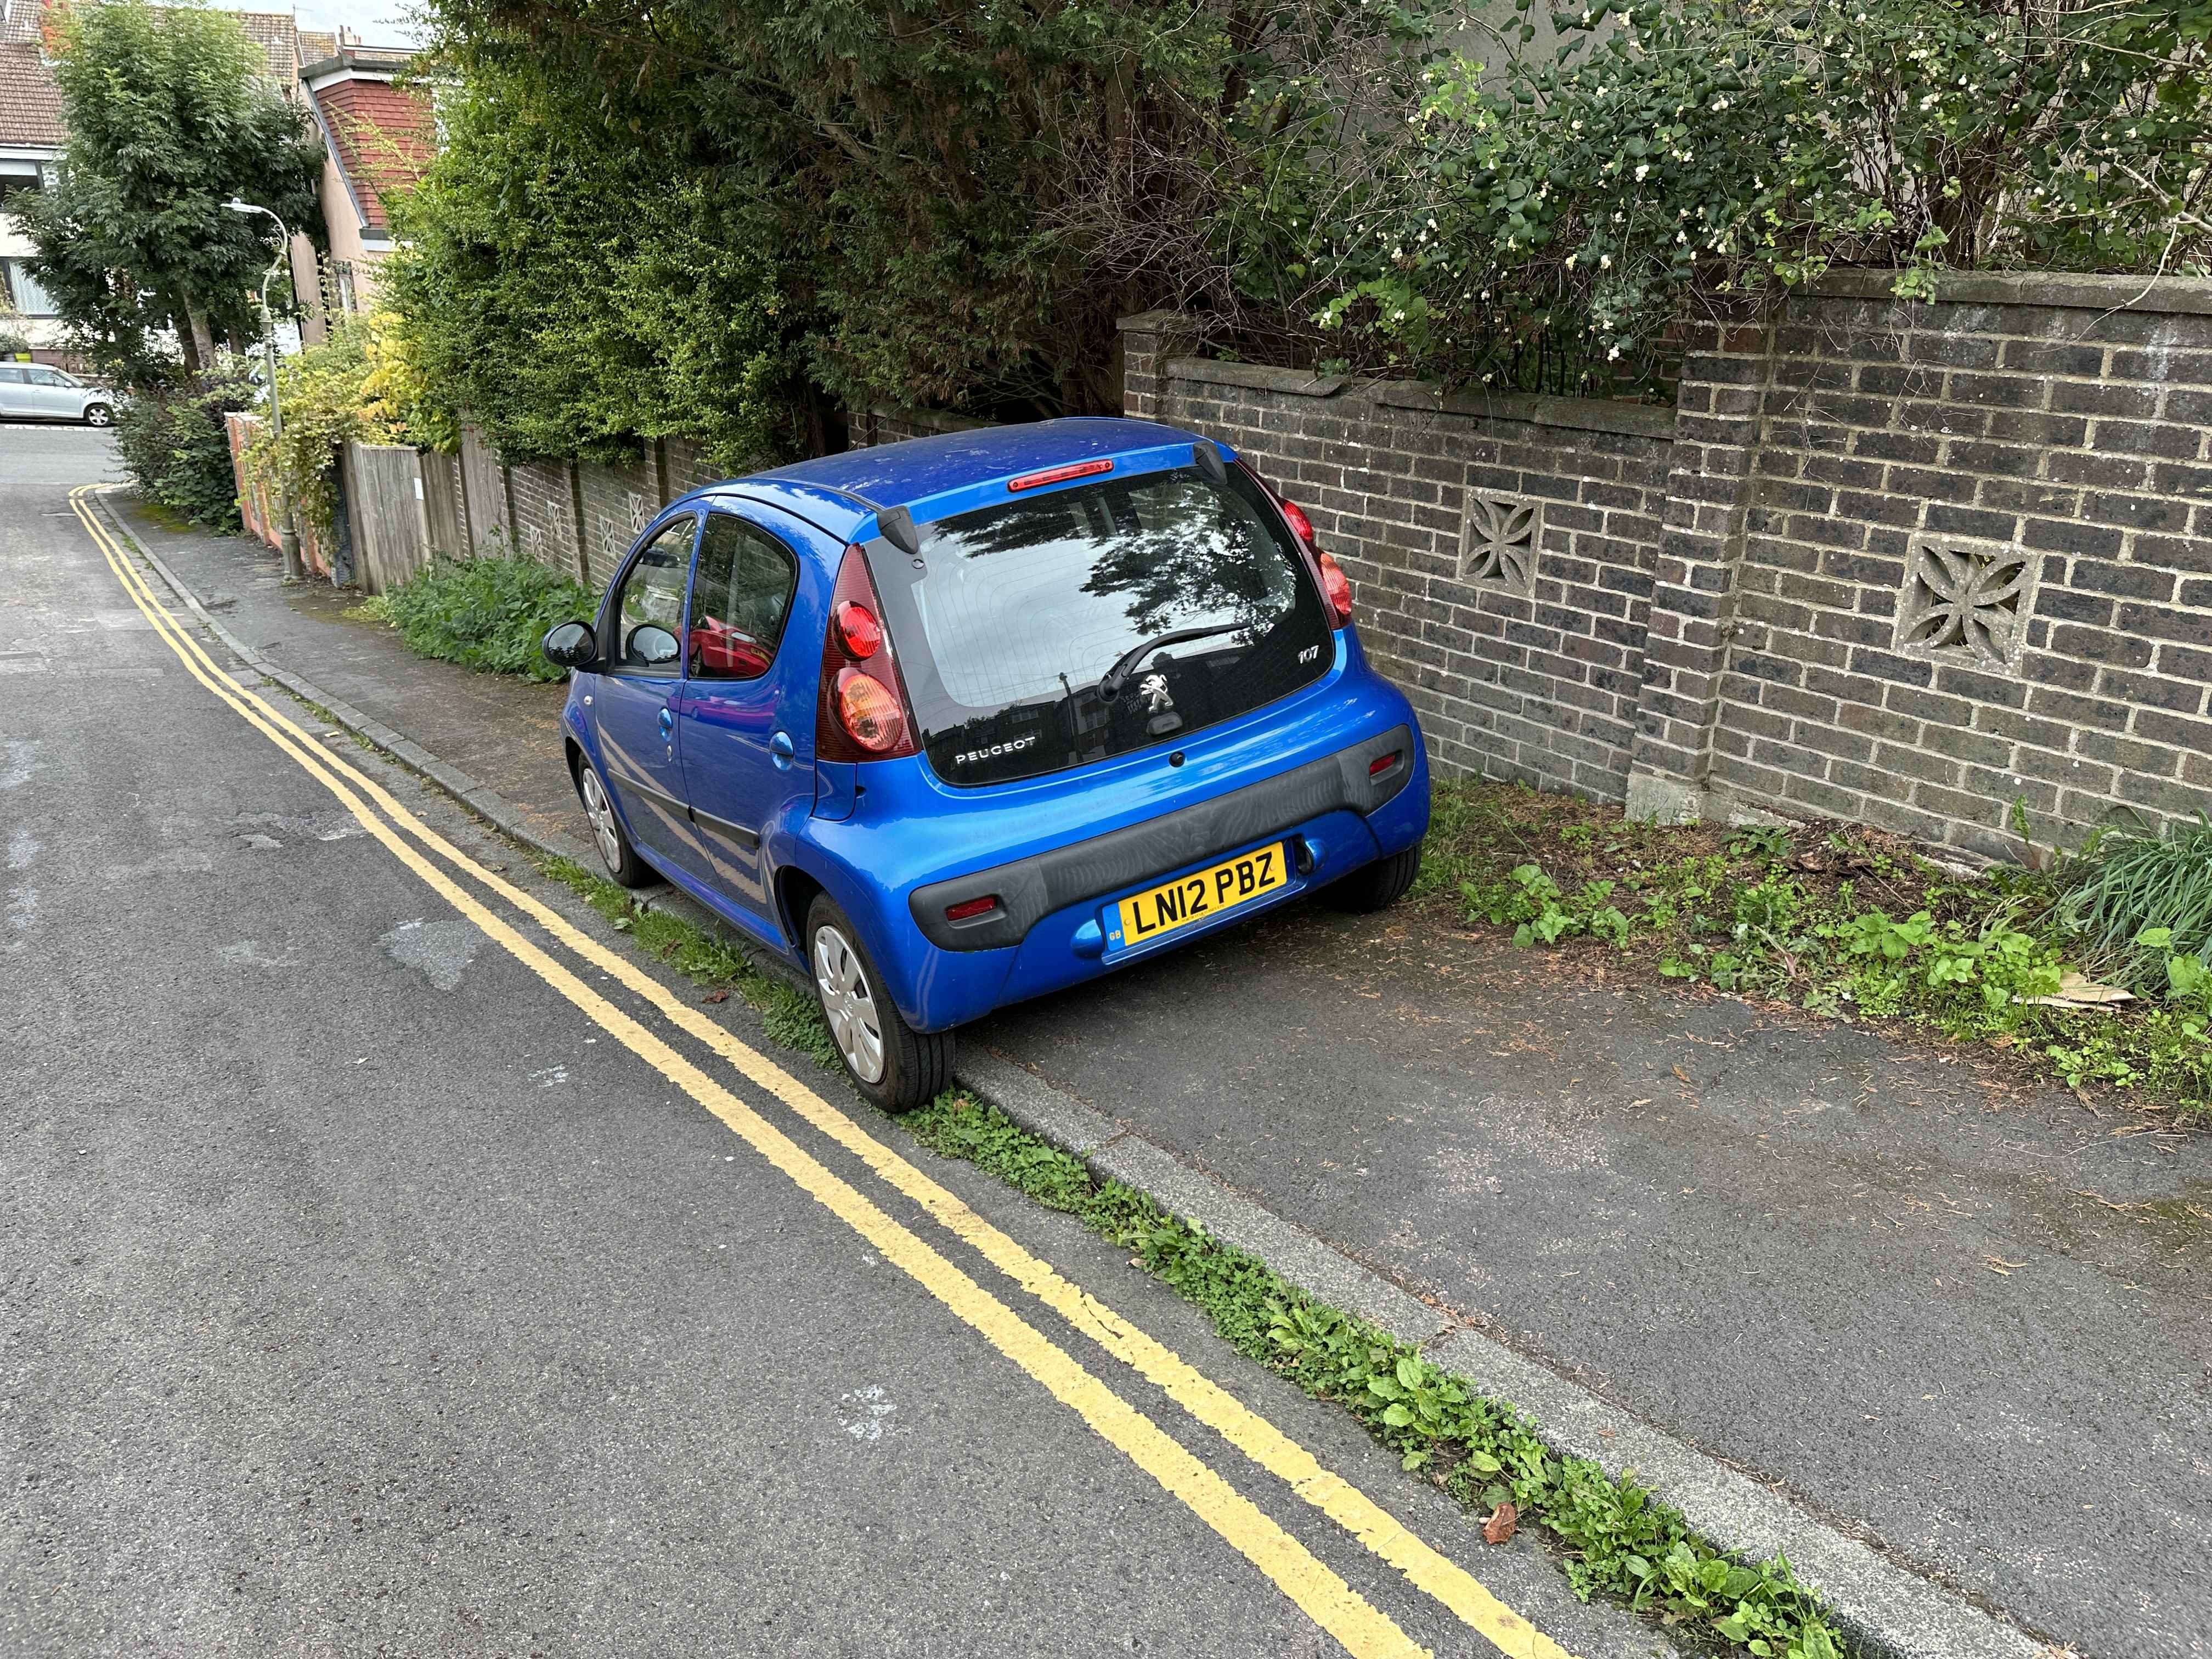 Photograph of LN12 PBZ - a Blue Peugeot 107 parked in Hollingdean by a non-resident. The third of six photographs supplied by the residents of Hollingdean.